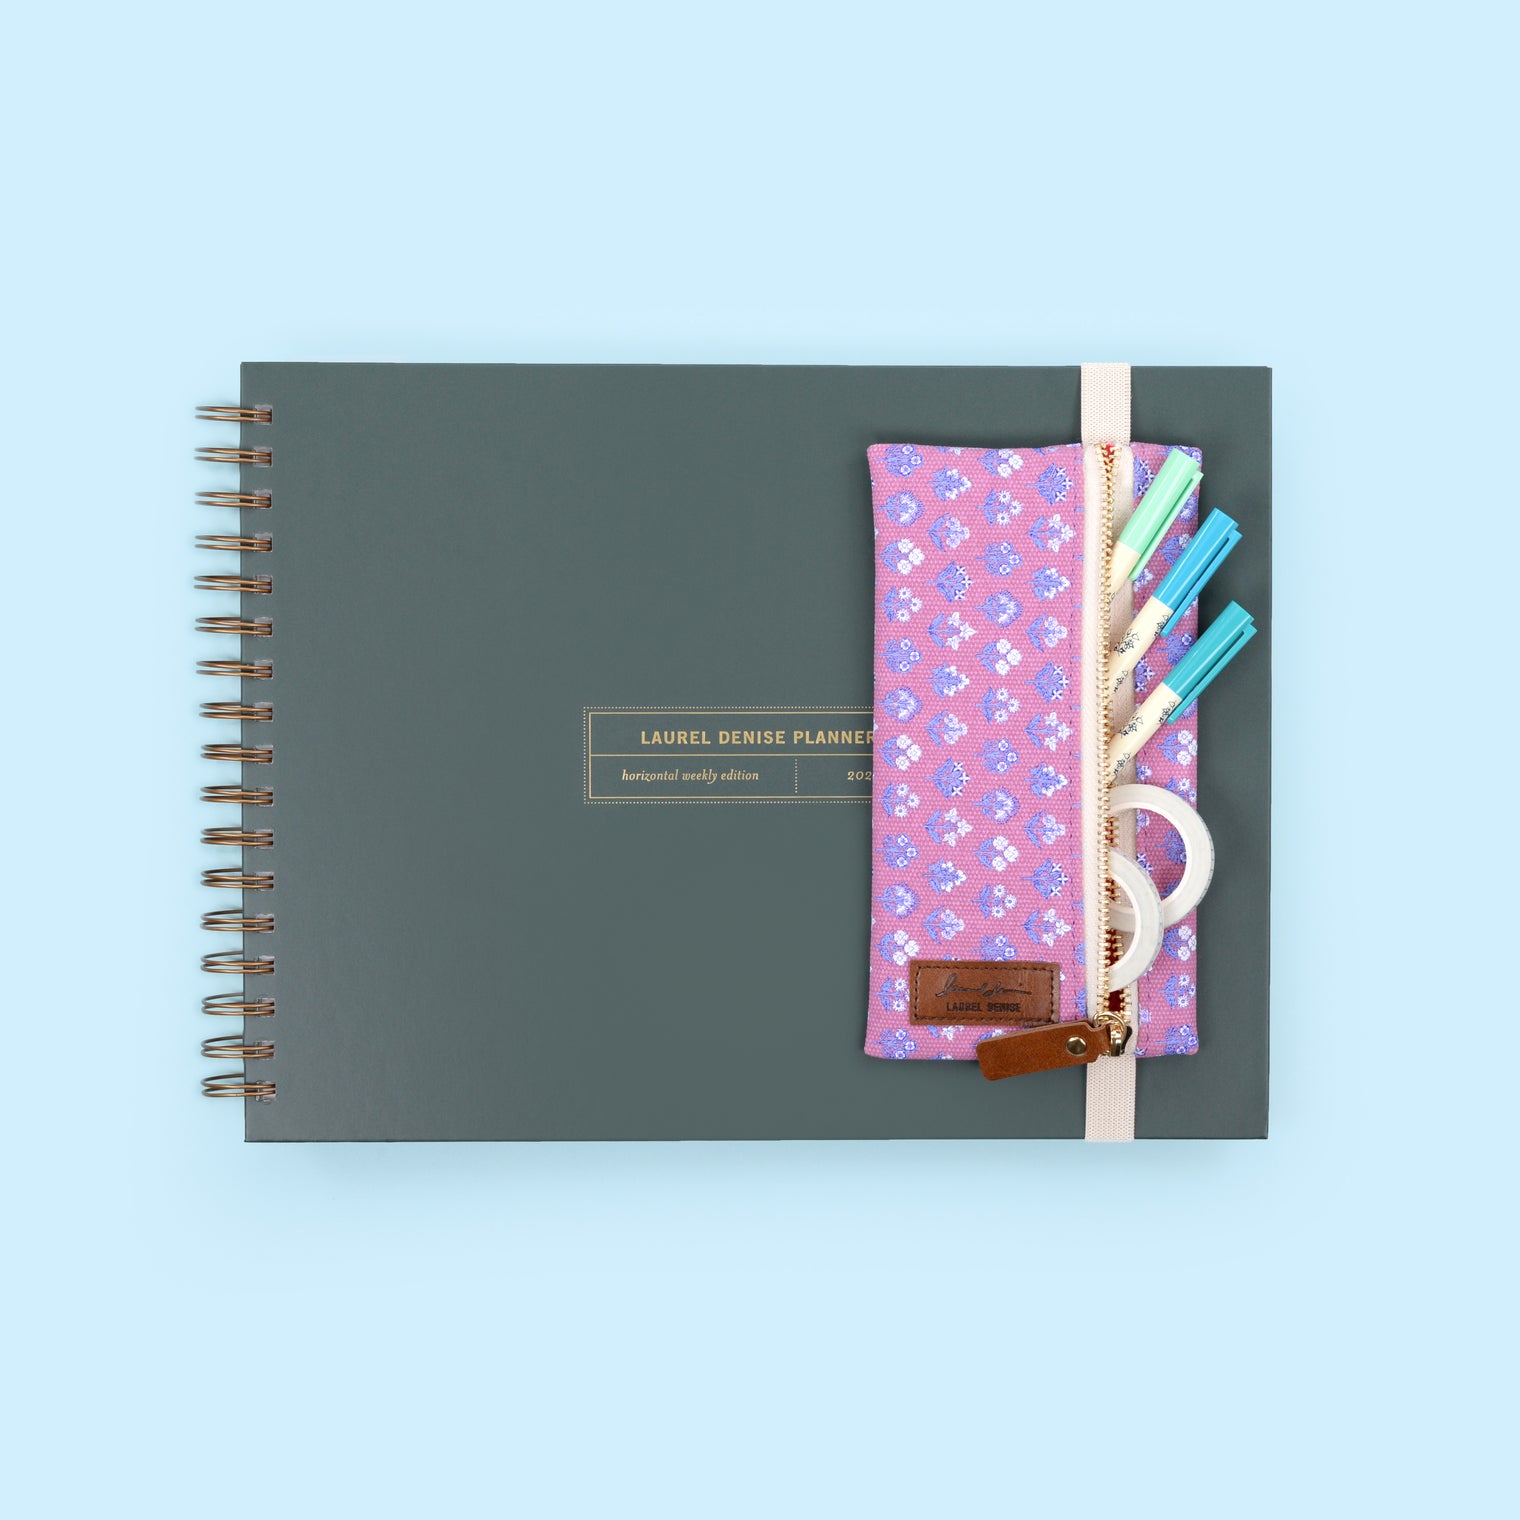 WITH ACCESSORIES ON PLANNER